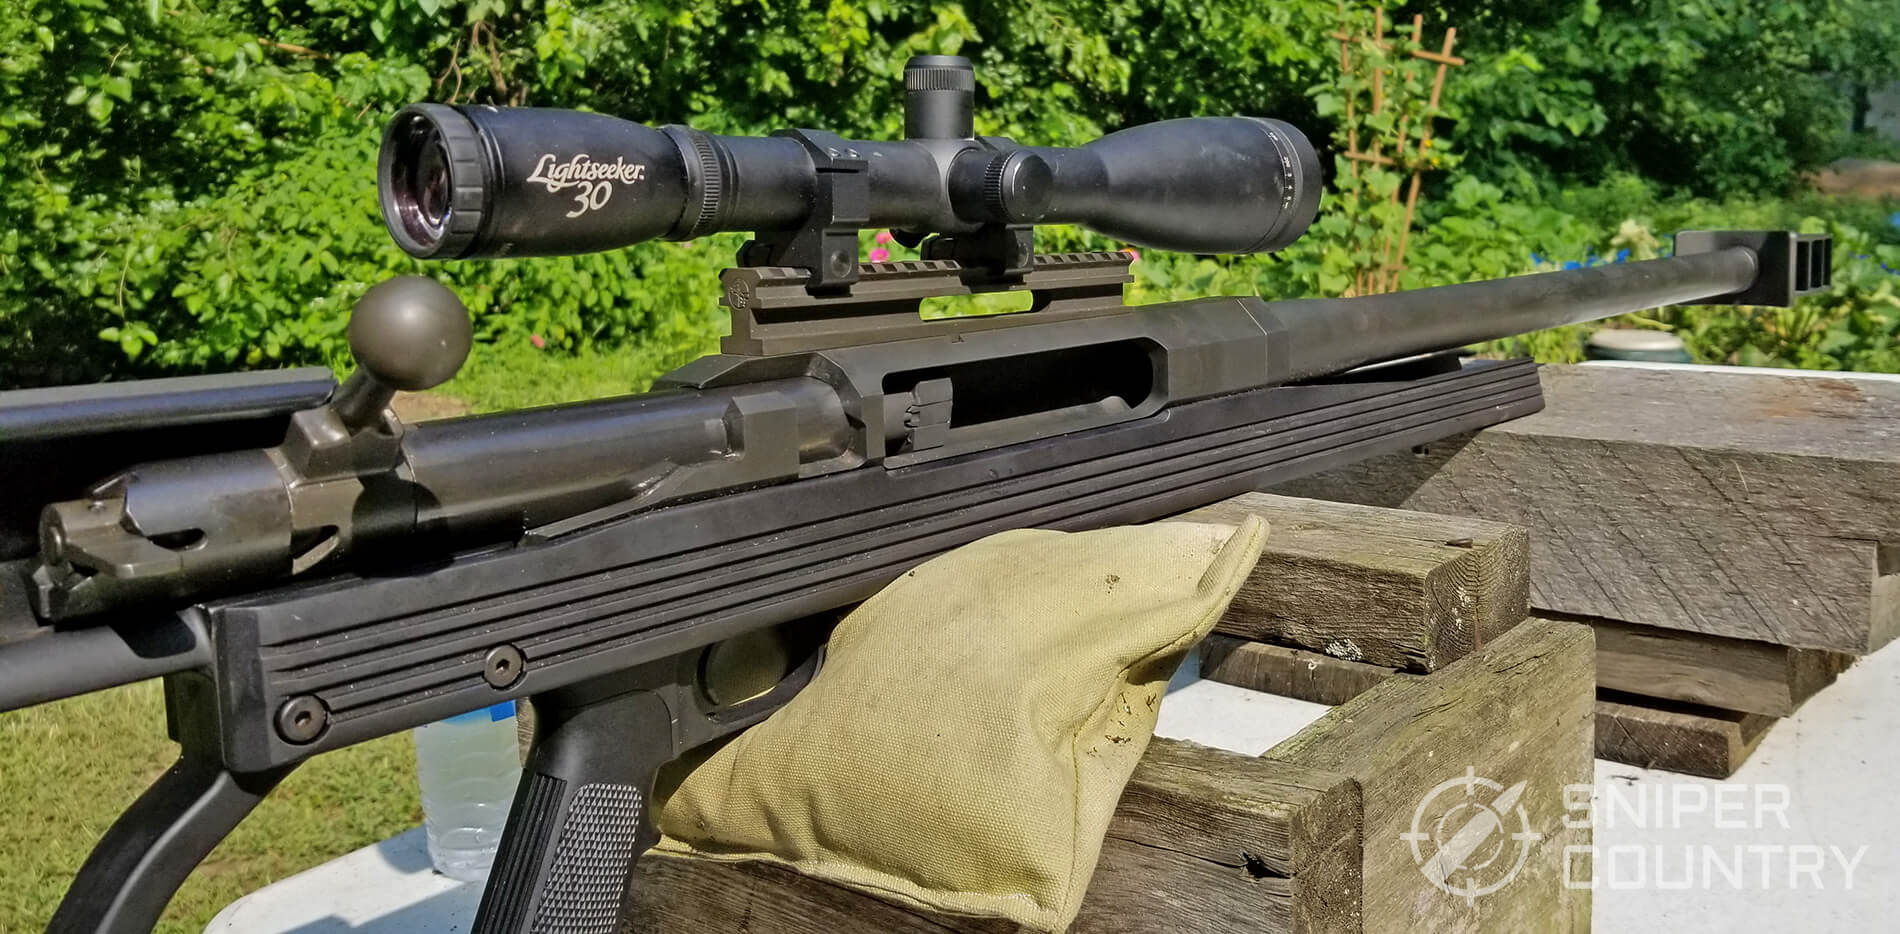 Top 10 Best 50 BMG Sniper Rifles In The World 